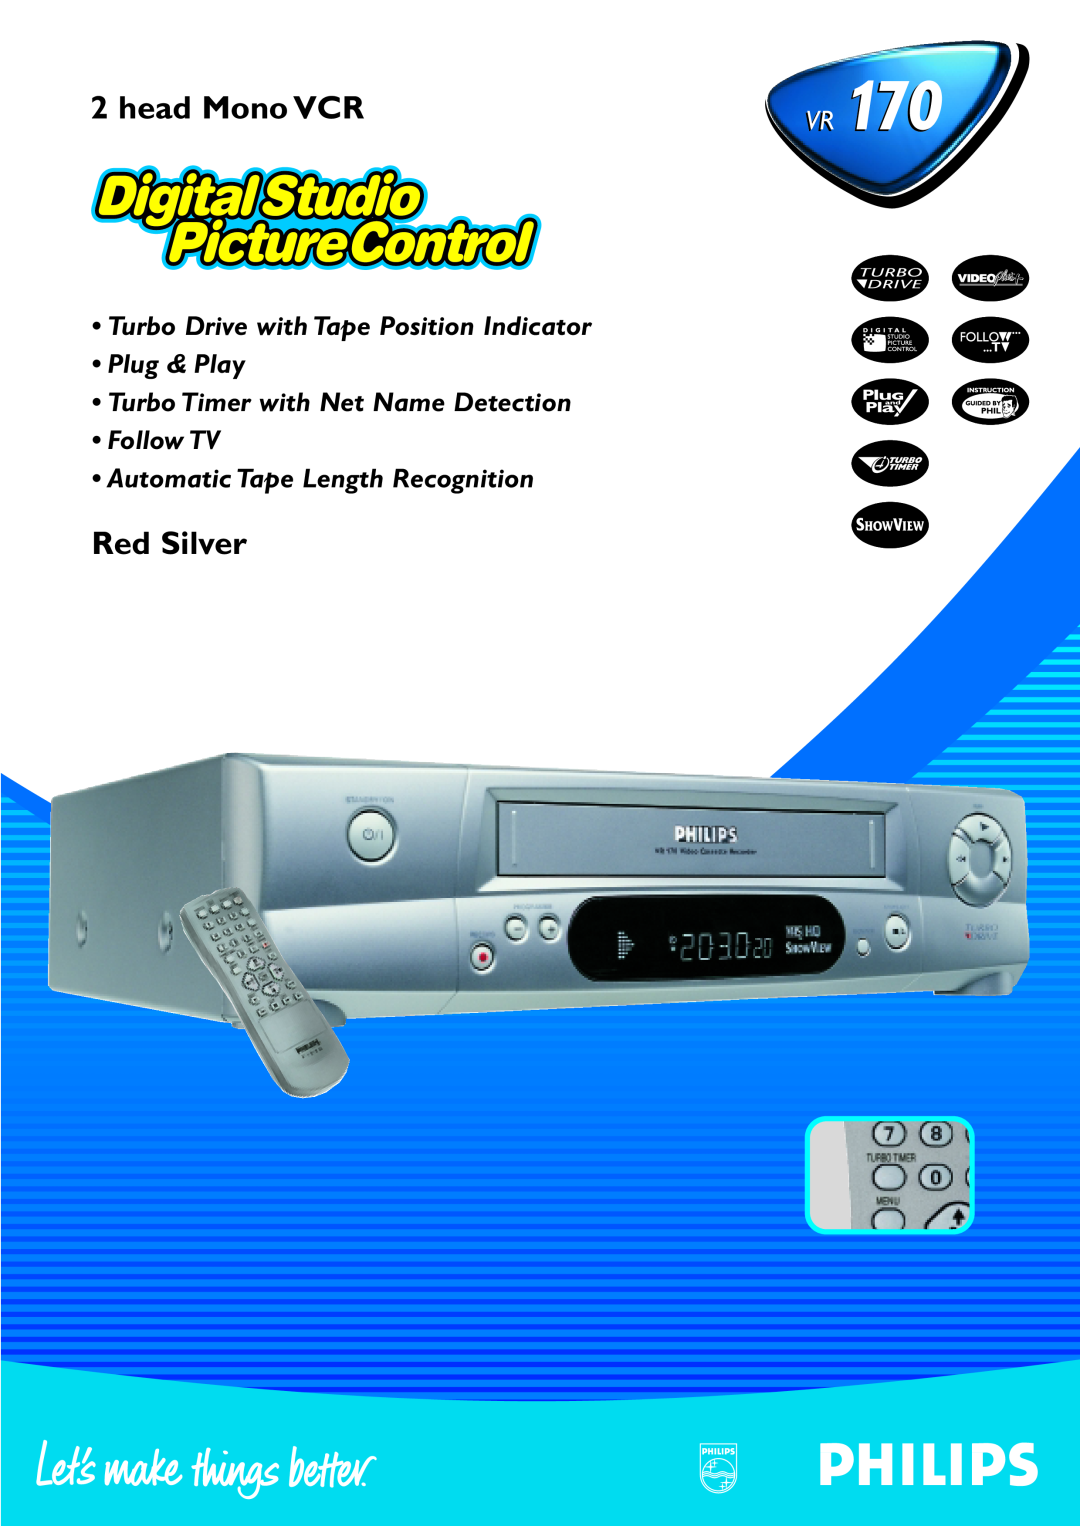 Philips VR 170 manual Red Silver, head Mono VCR, Turbo Drive with Tape Position Indicator, Plug & Play 